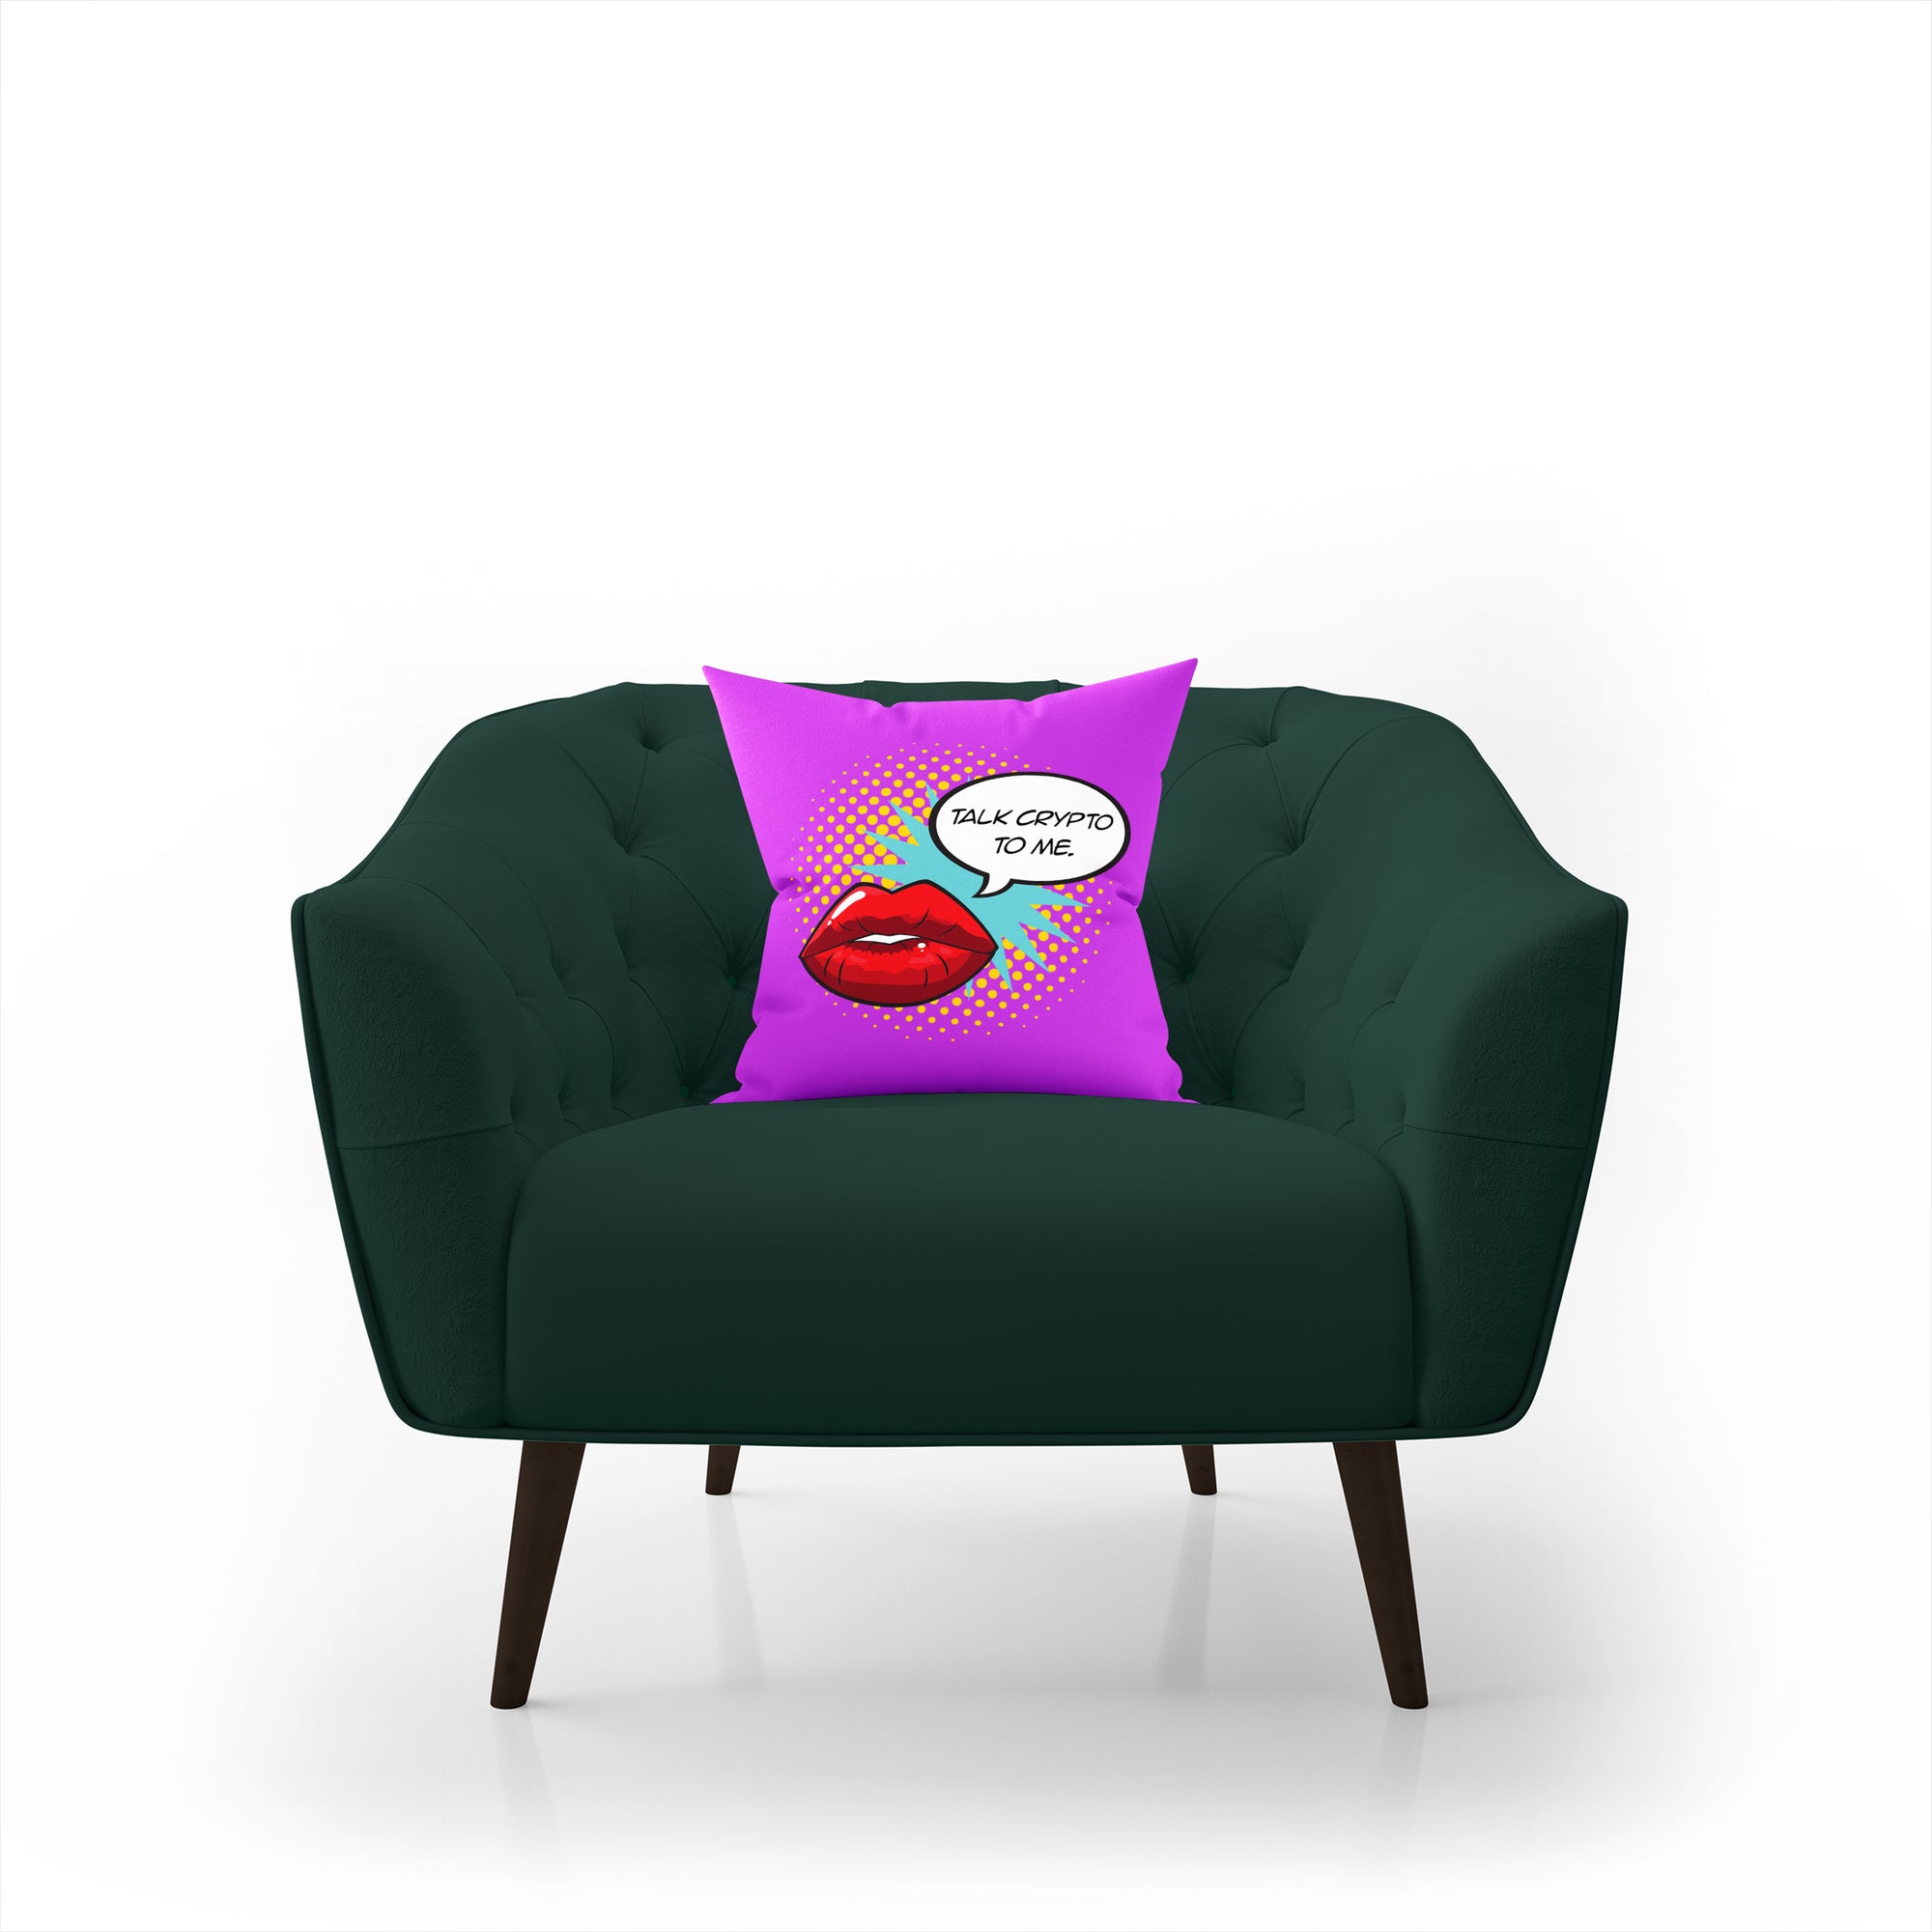 Crypto Merchandise - Talk Crypto To Me Pillow displayed on green armchair.